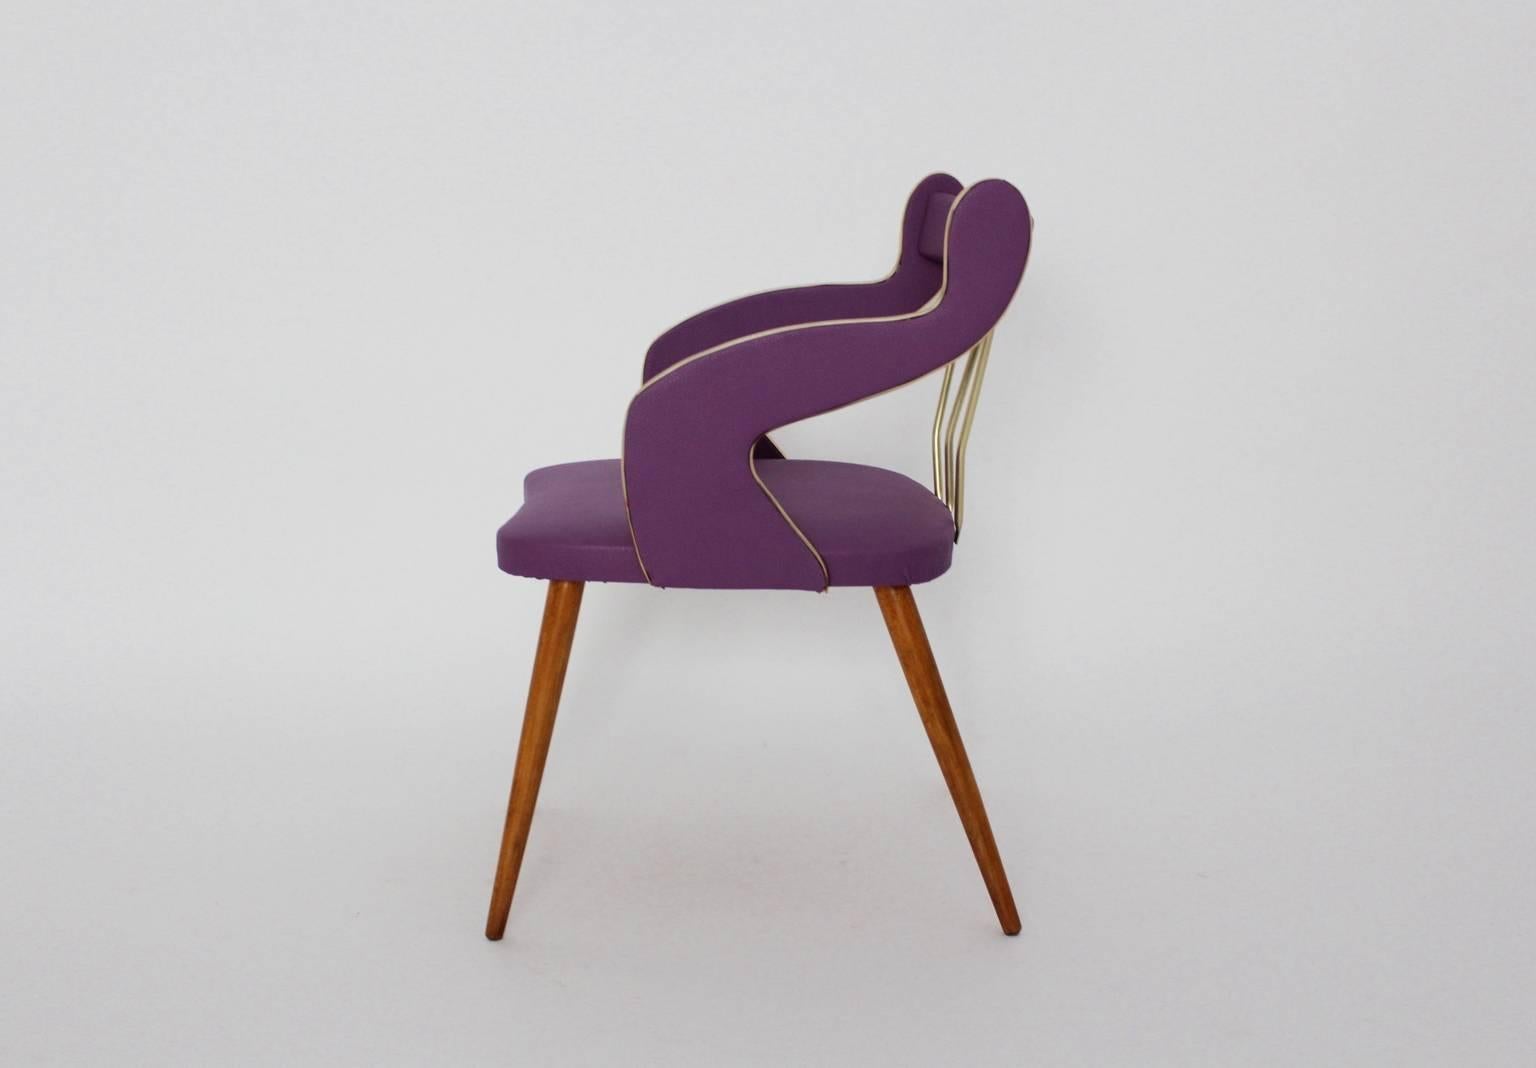 Mid Century Modern lilac vintage armchair or side chair designed in Italy circa 1950. 
A charming freestanding Italian armchair from solid beechwood and vivid lilac cover from faux leather.
This armchair shows a replaced cover from faux leather in